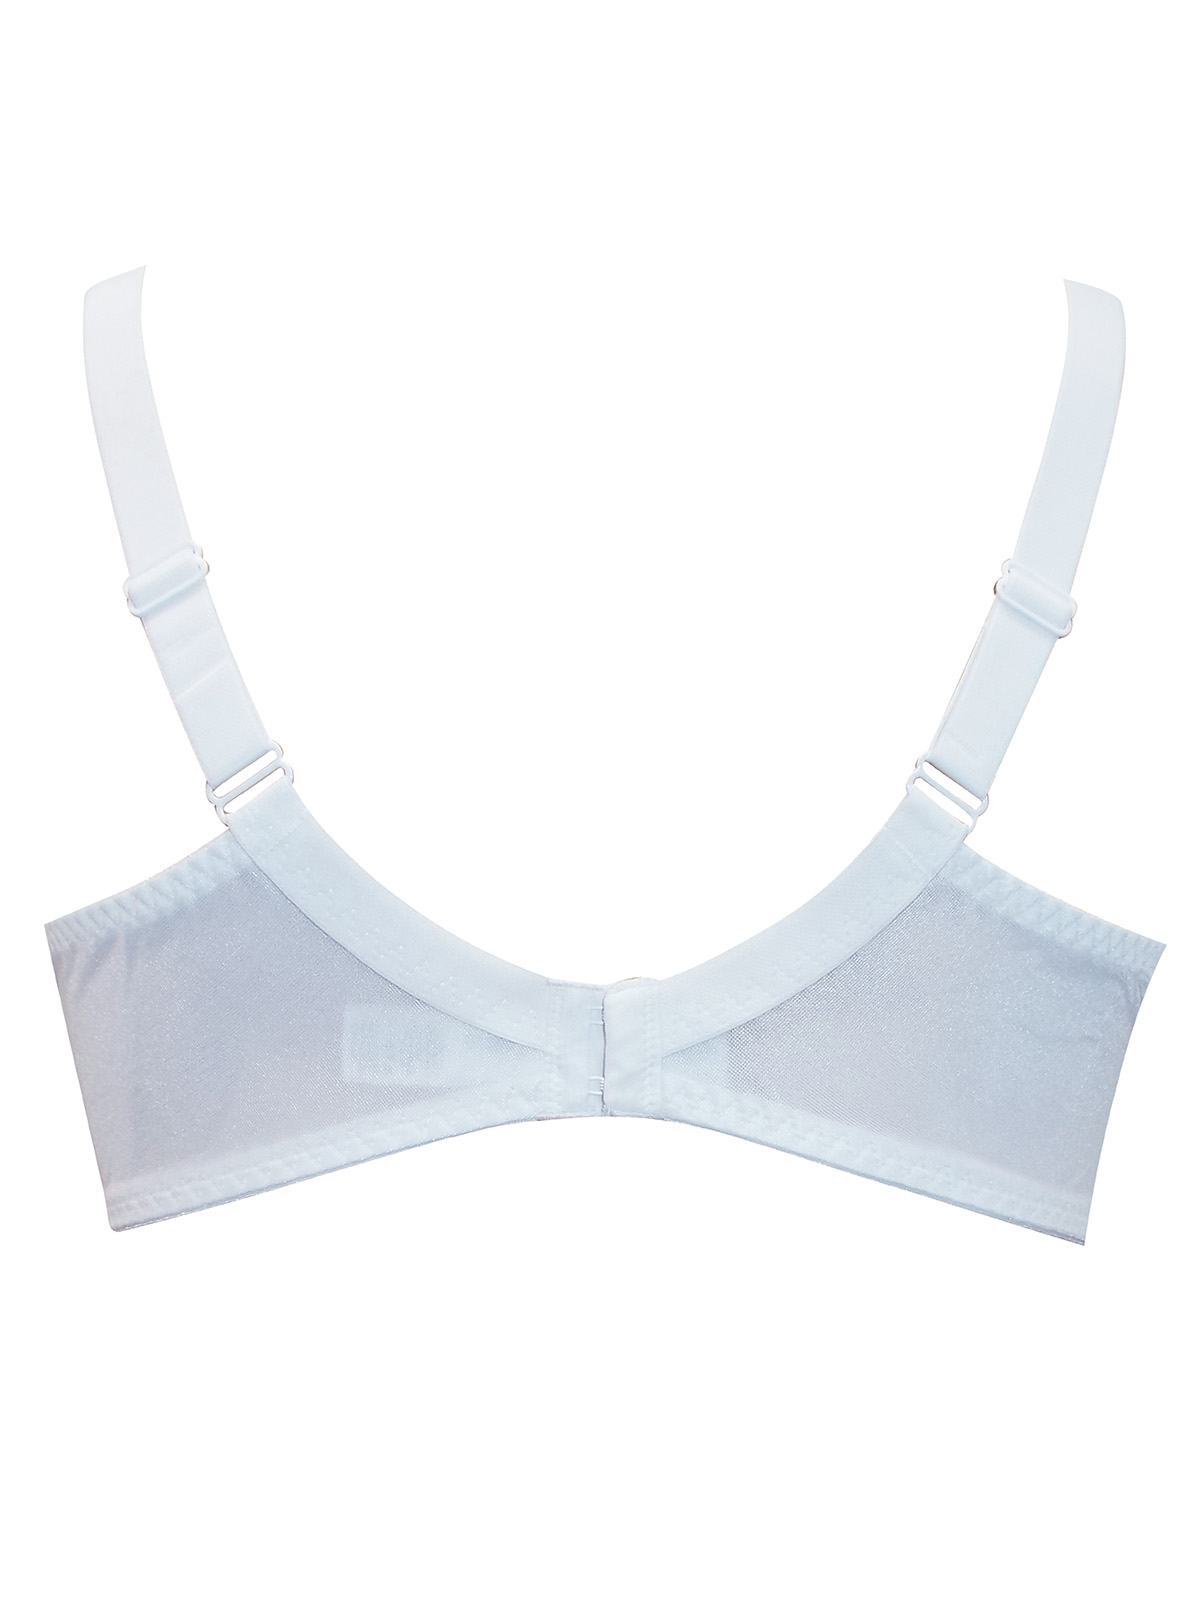 George - - G3ORGE WHITE Lace Trim Underwired Full Cup Bra - Size 36 to ...